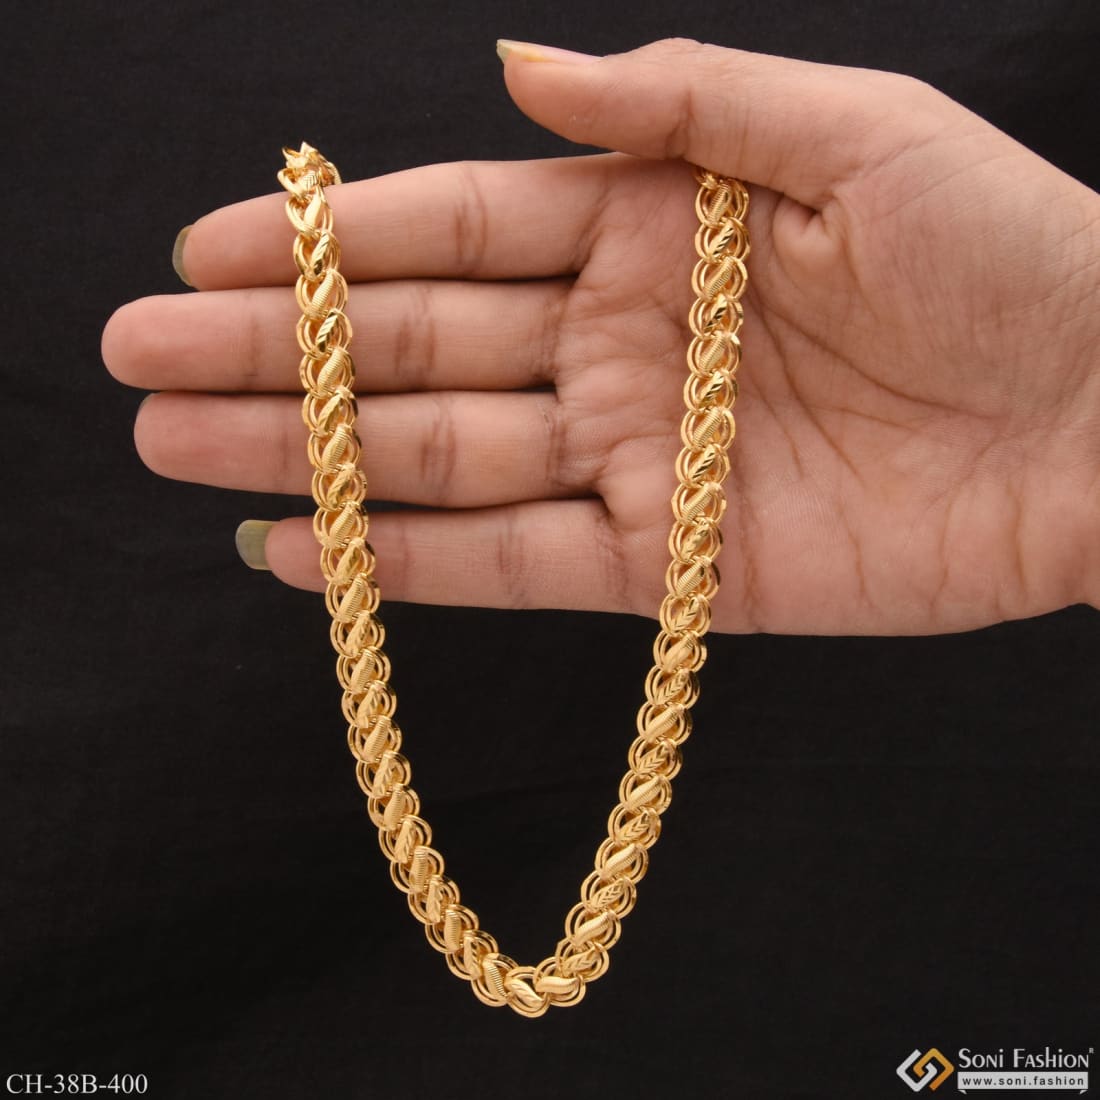 Double Ring Chain Necklace | AMiGAZ Attitude Approved Accessories